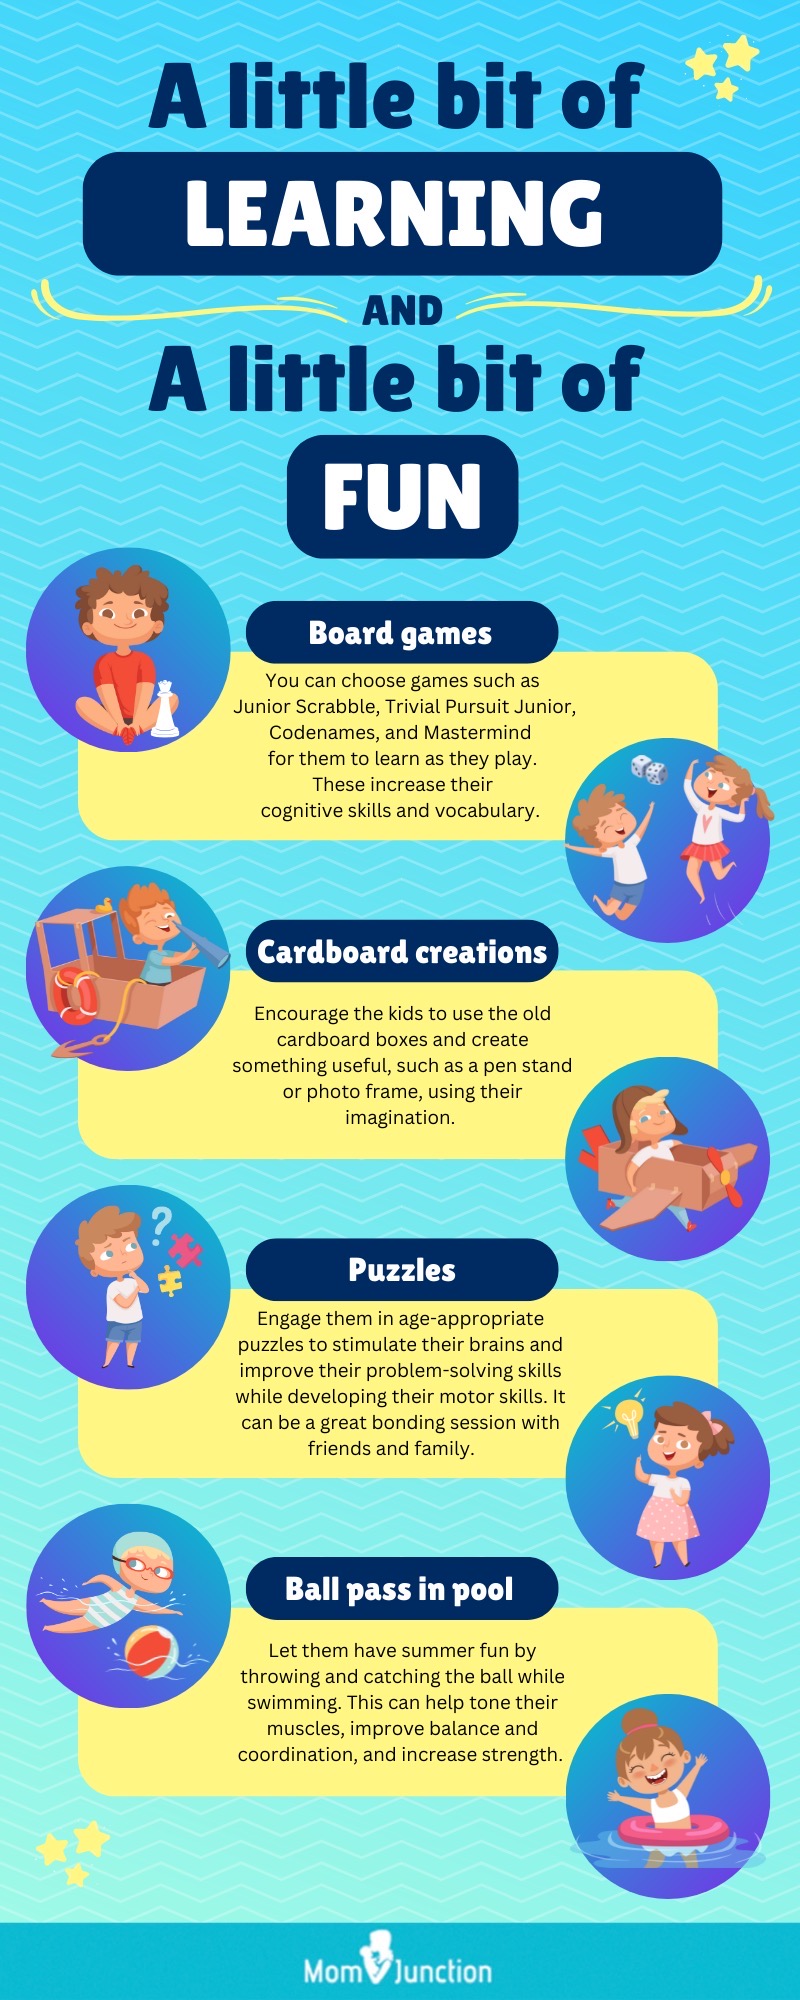 Baby games: 8 fun games to play with your little one - Today's Parent